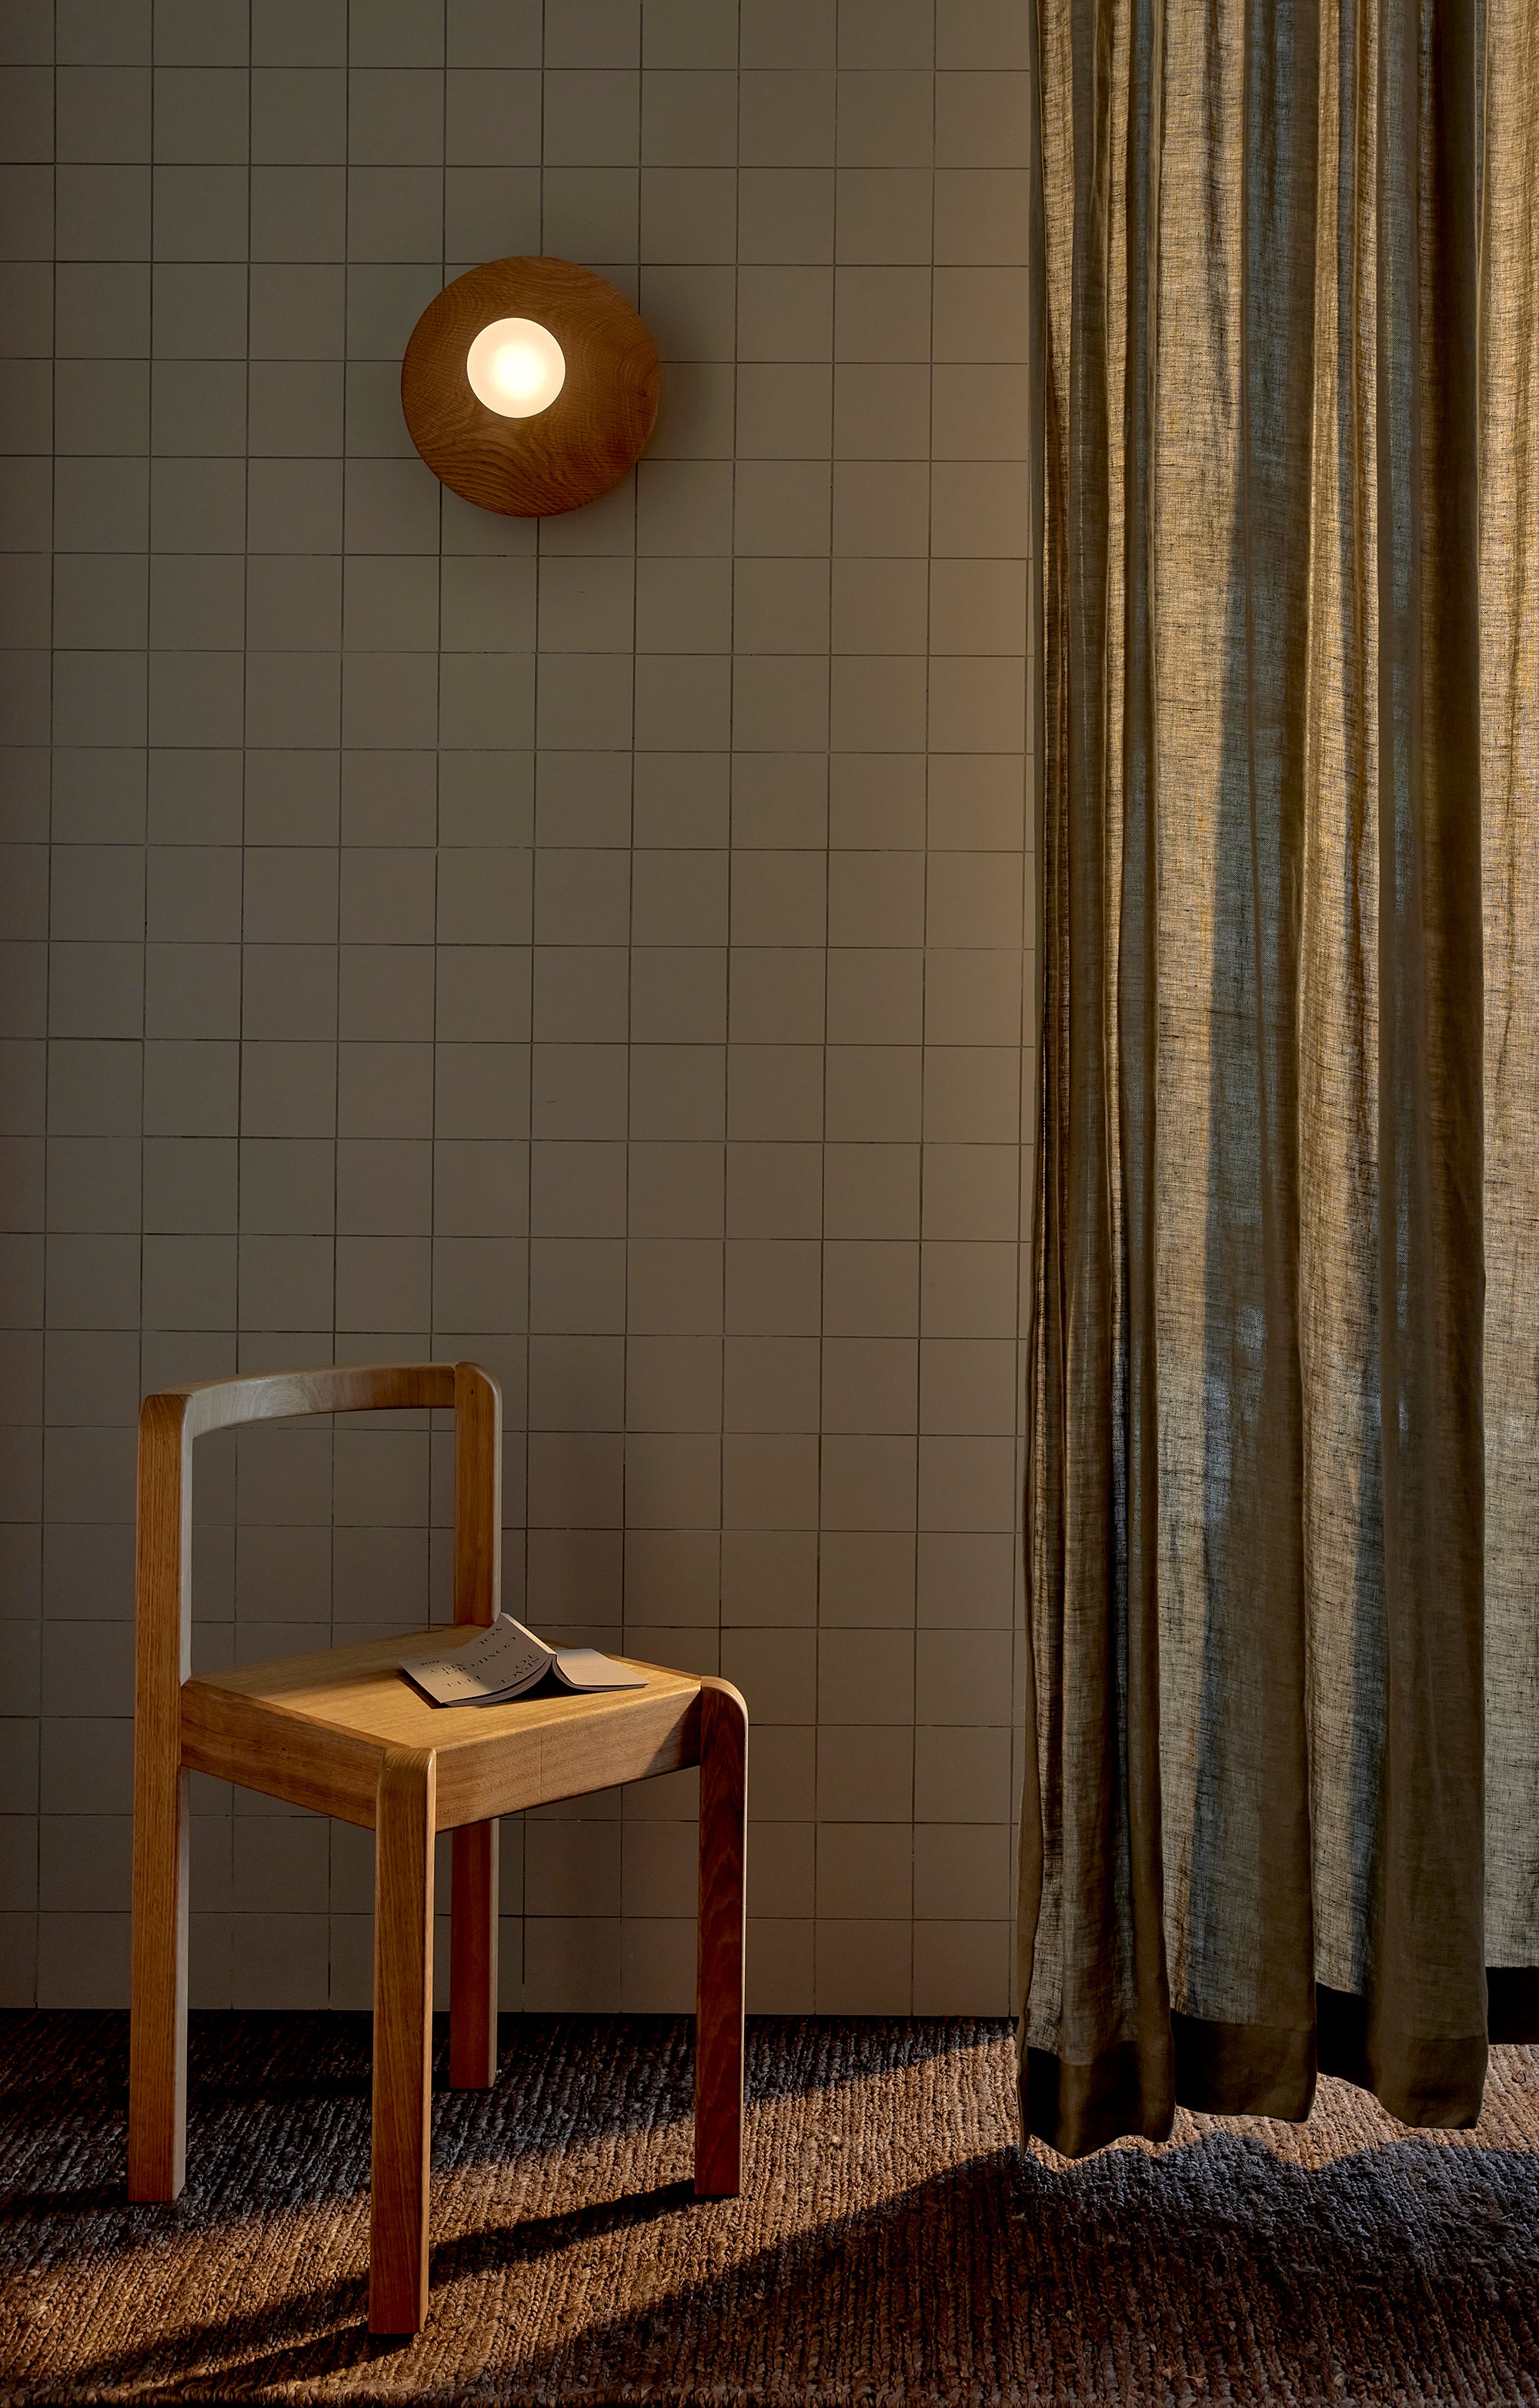 Bright Beads Wall Disc in Oak. Photographed by Lawrence Furzey.